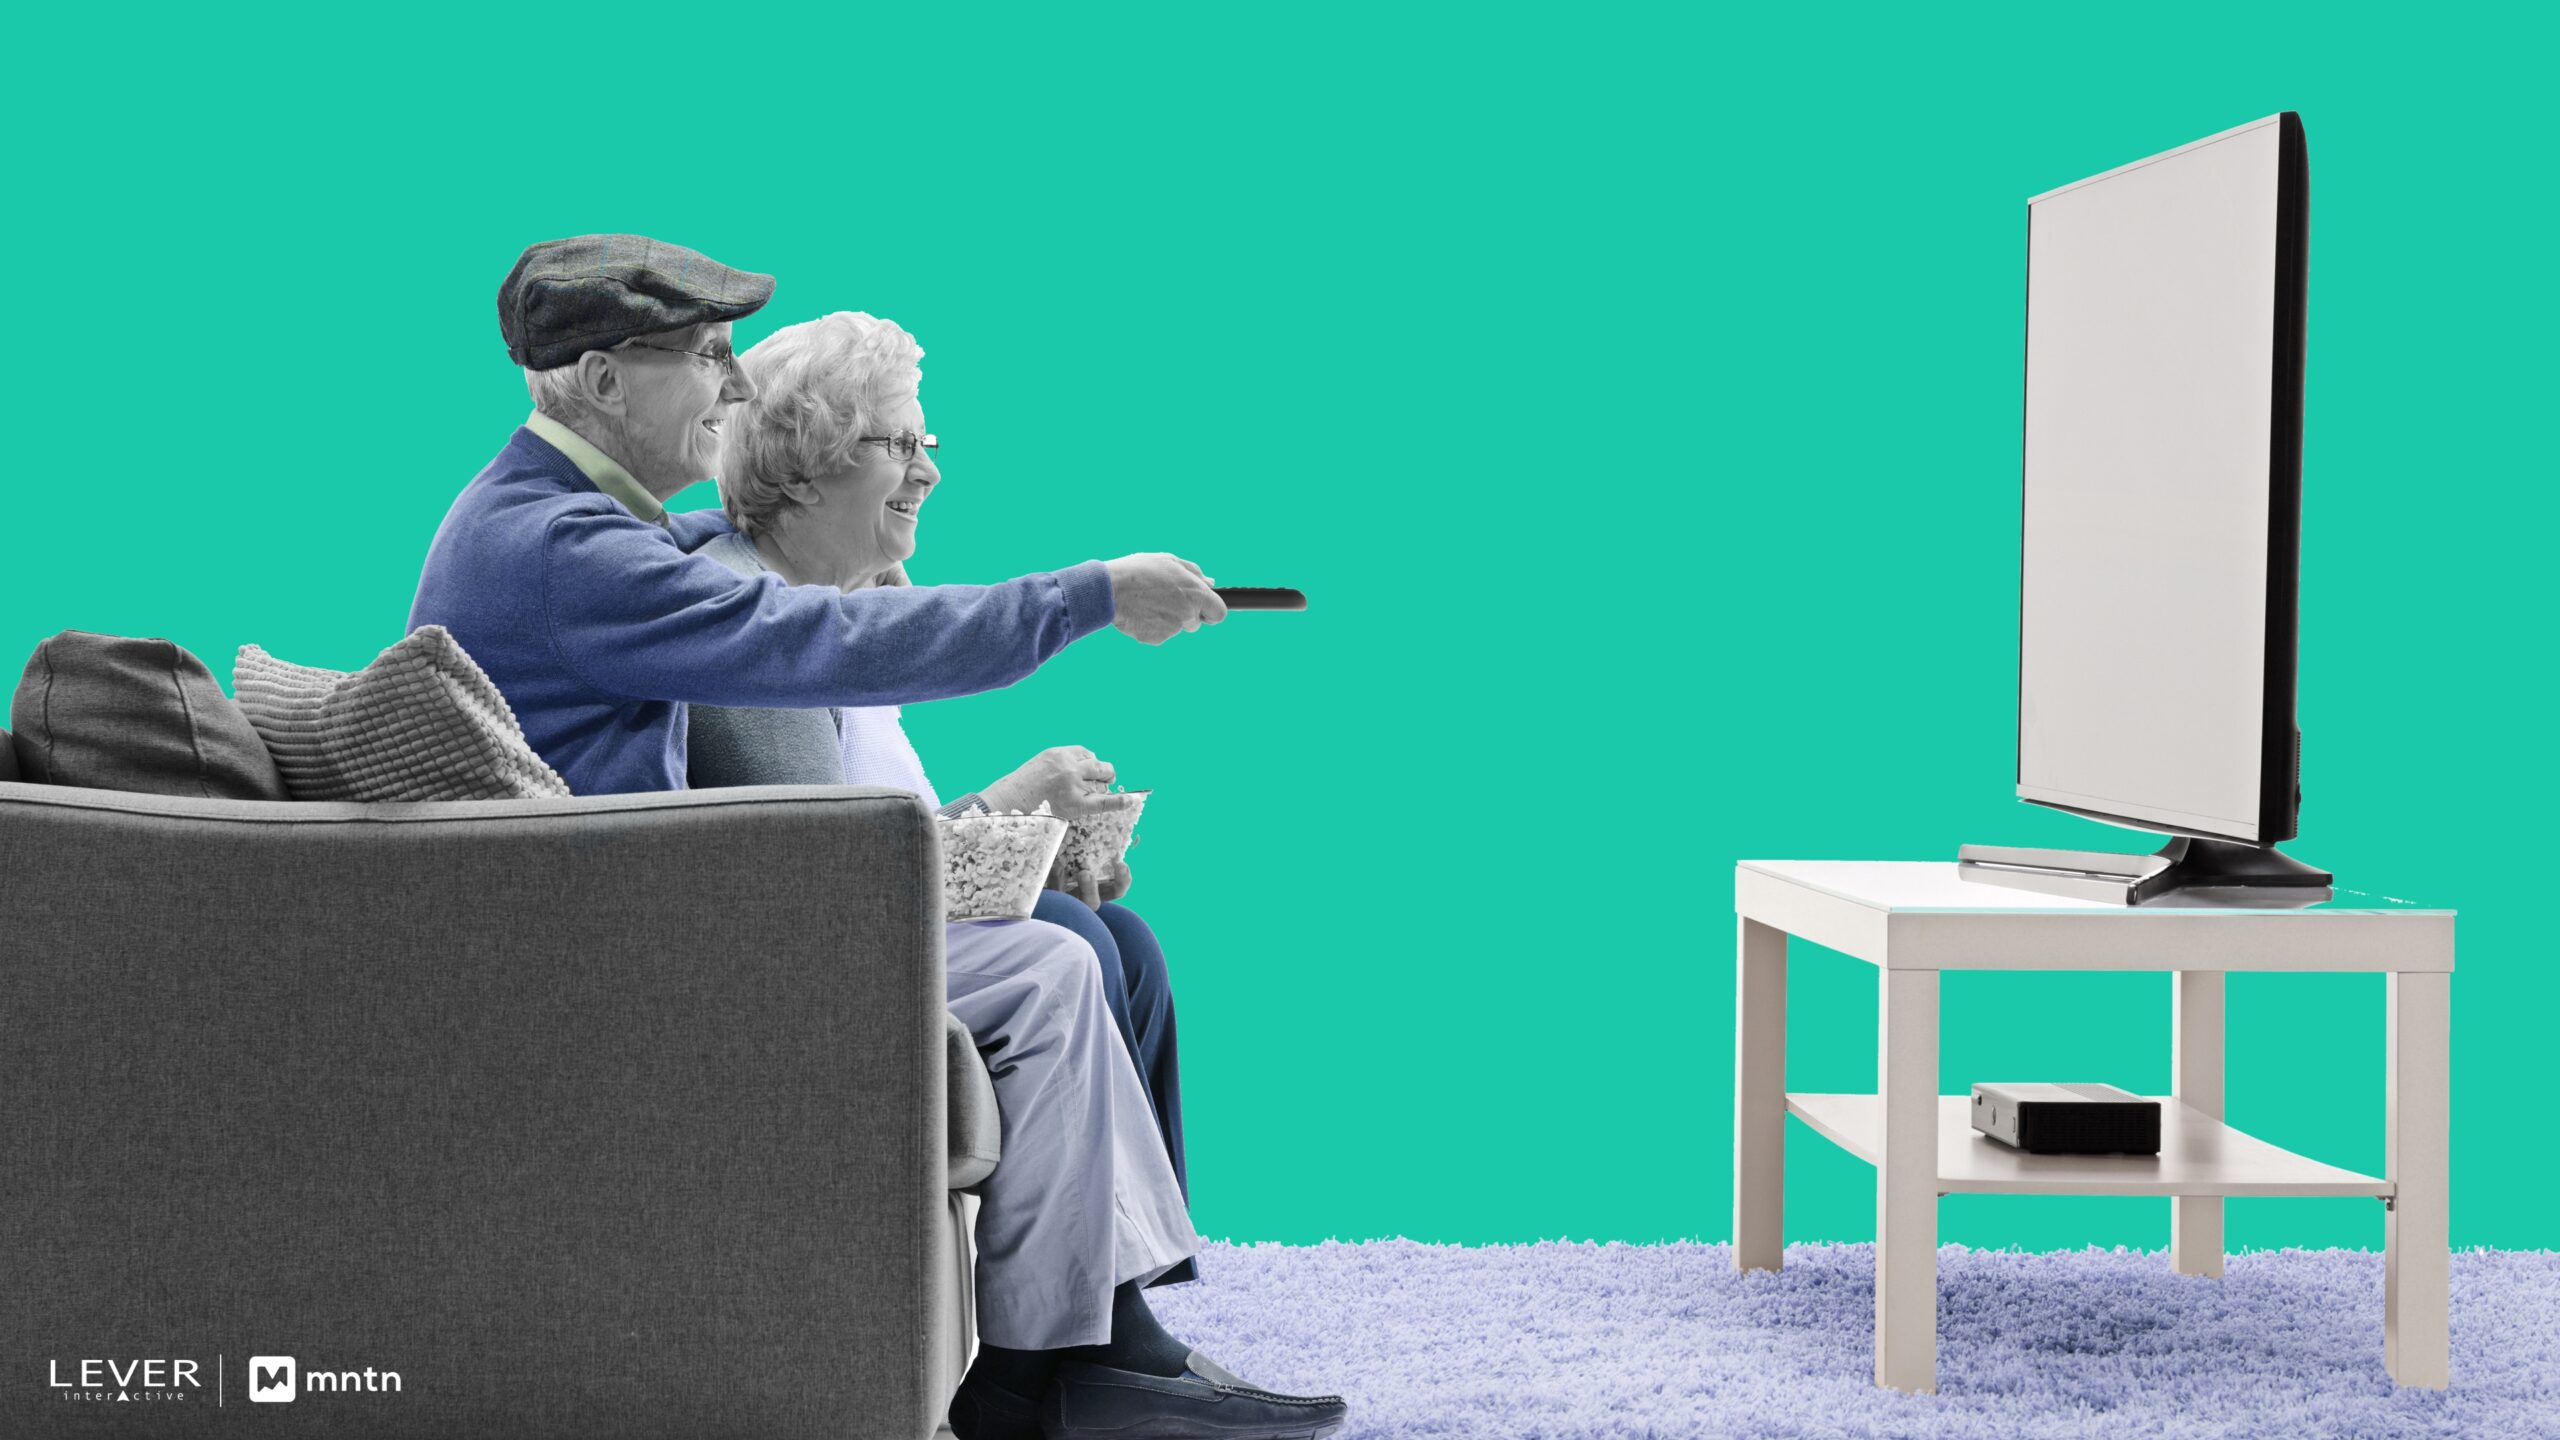 The Silver Economy: What We Know About the Senior Generations on Connected TV